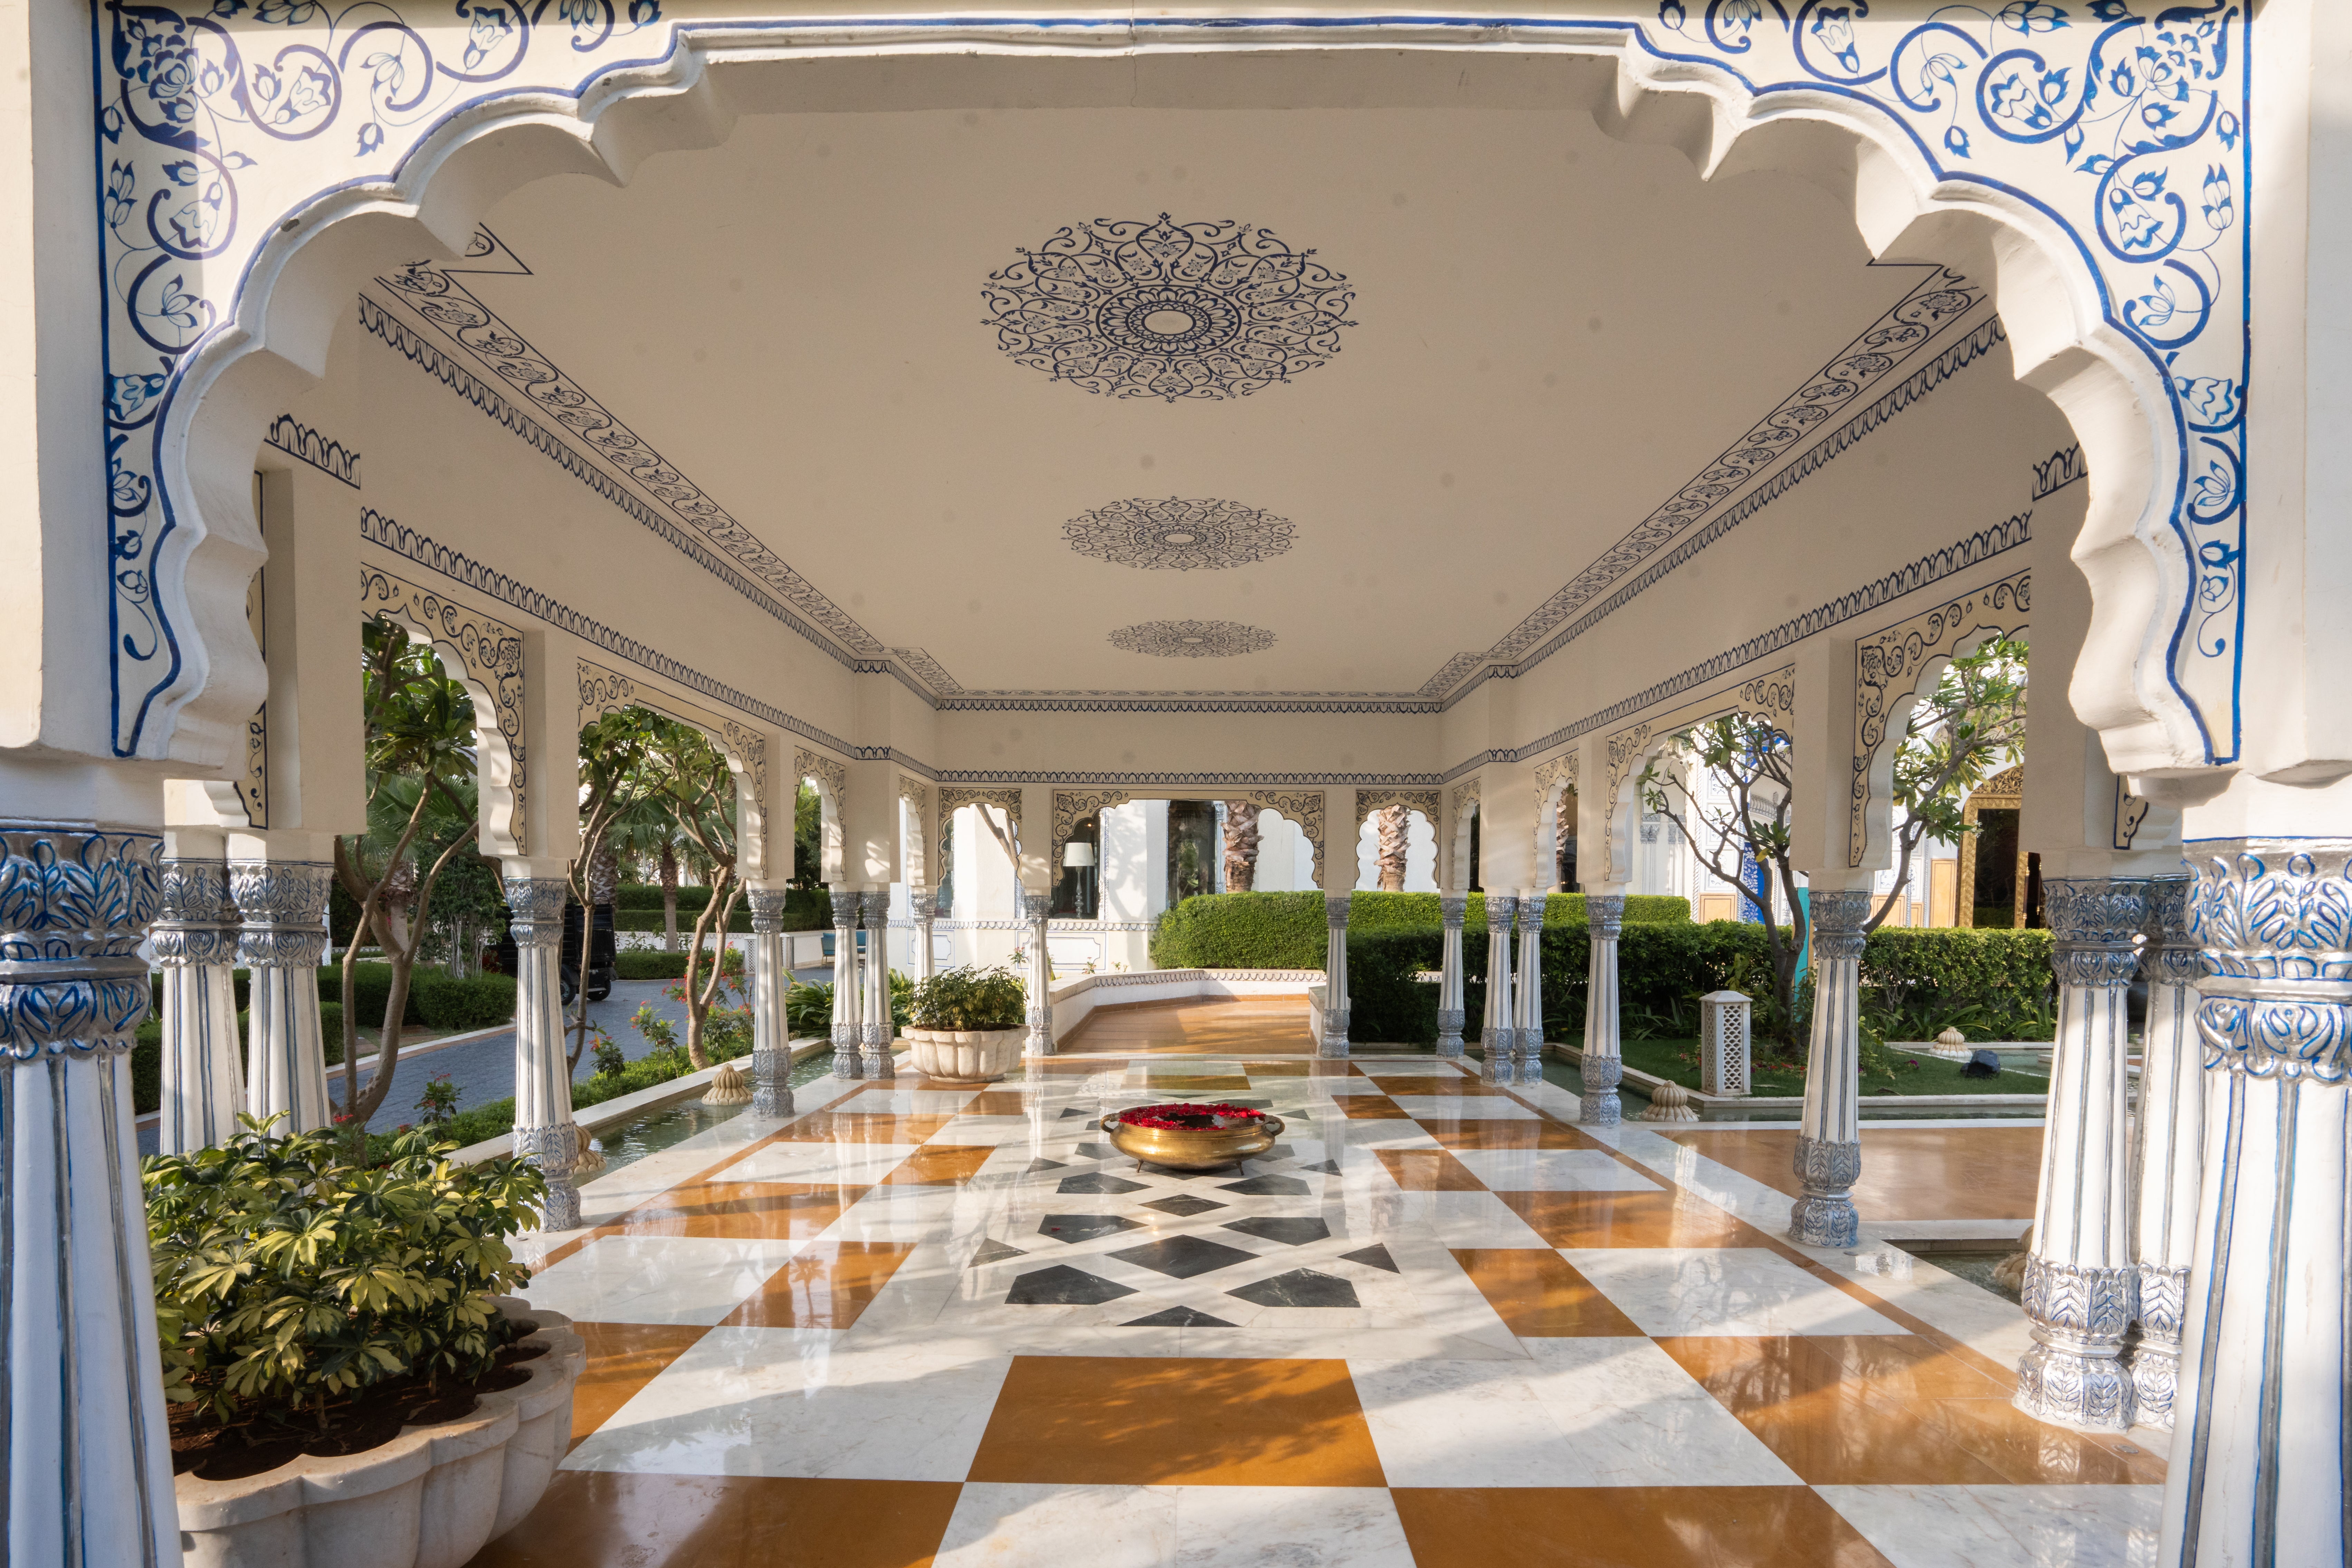 Expect to find spaces inspired by royal palaces, inside and out